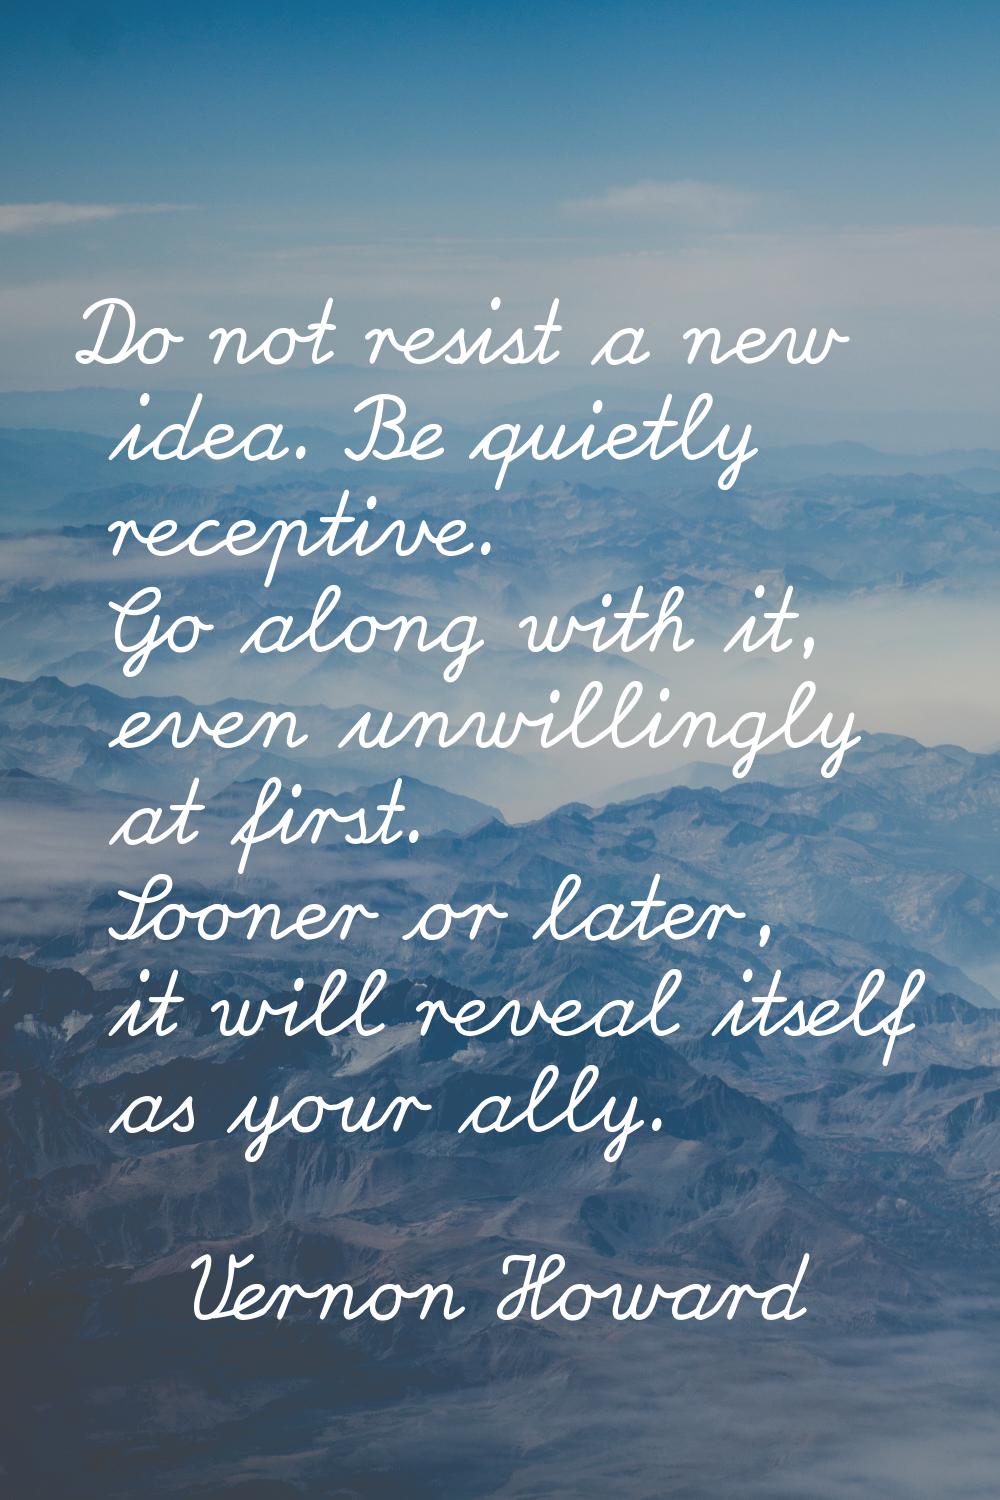 Do not resist a new idea. Be quietly receptive. Go along with it, even unwillingly at first. Sooner